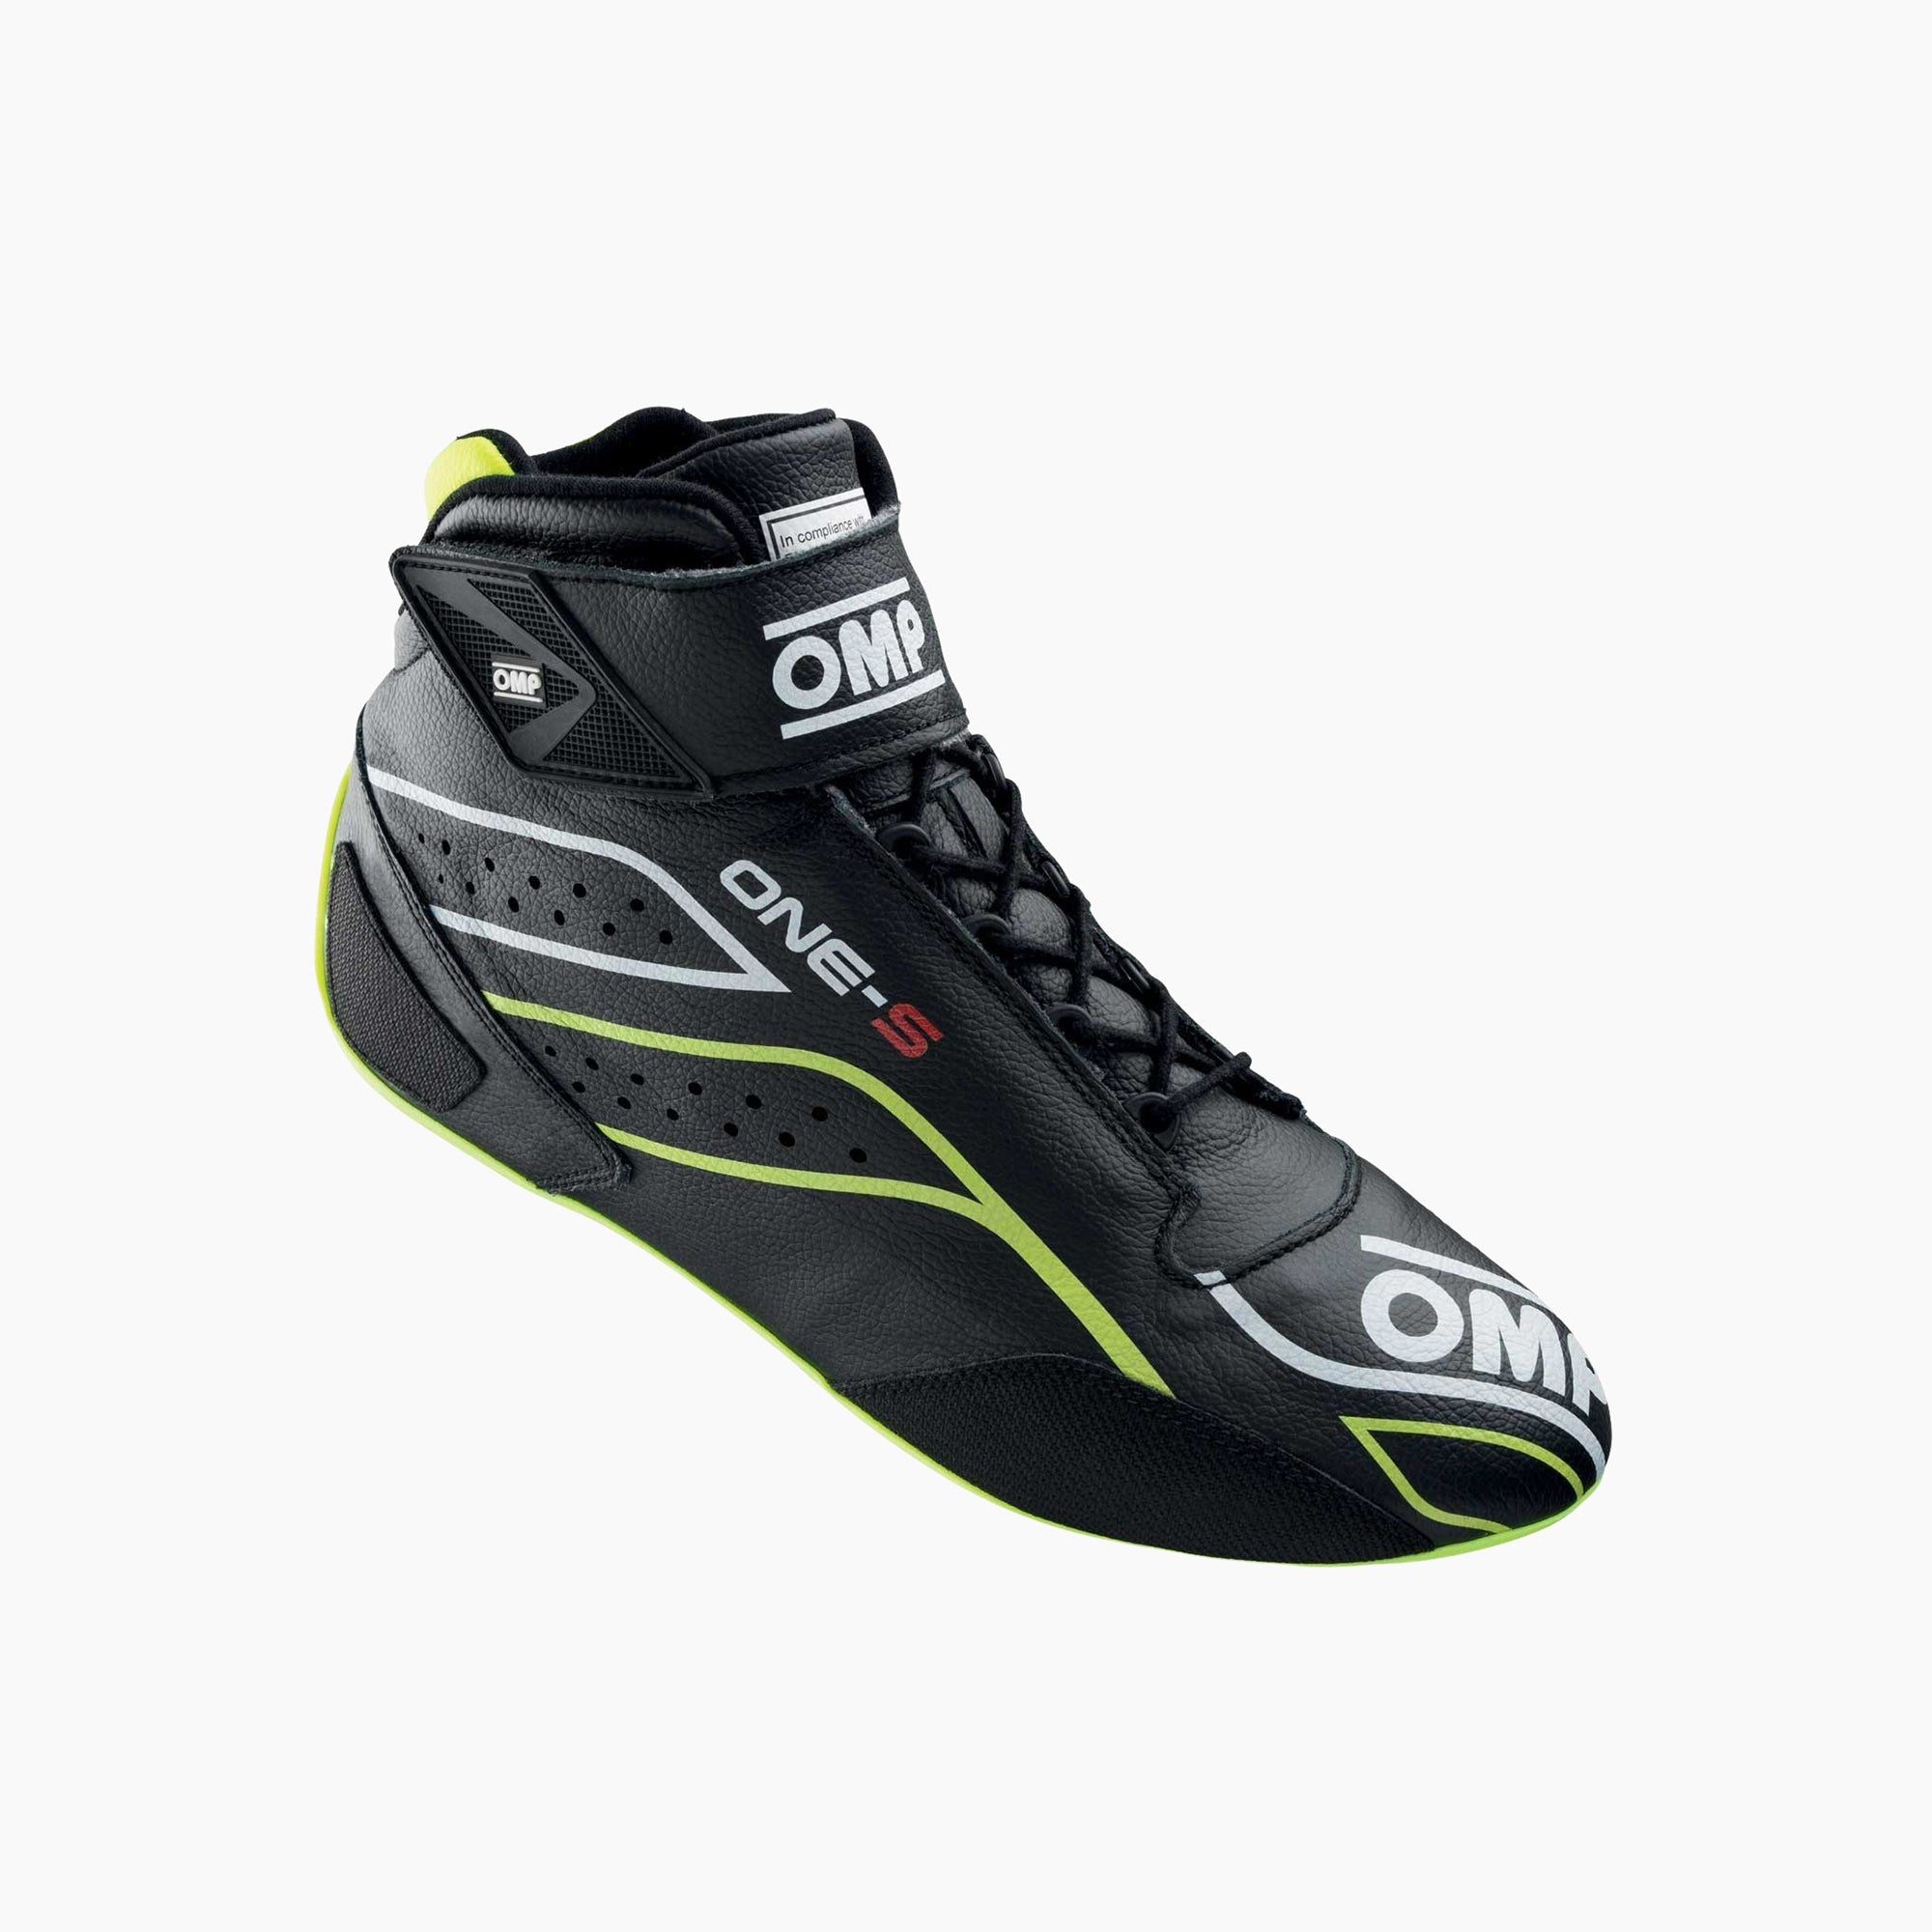 OMP | ONE-S Racing Shoes-Racing Shoes-OMP-gpx-store